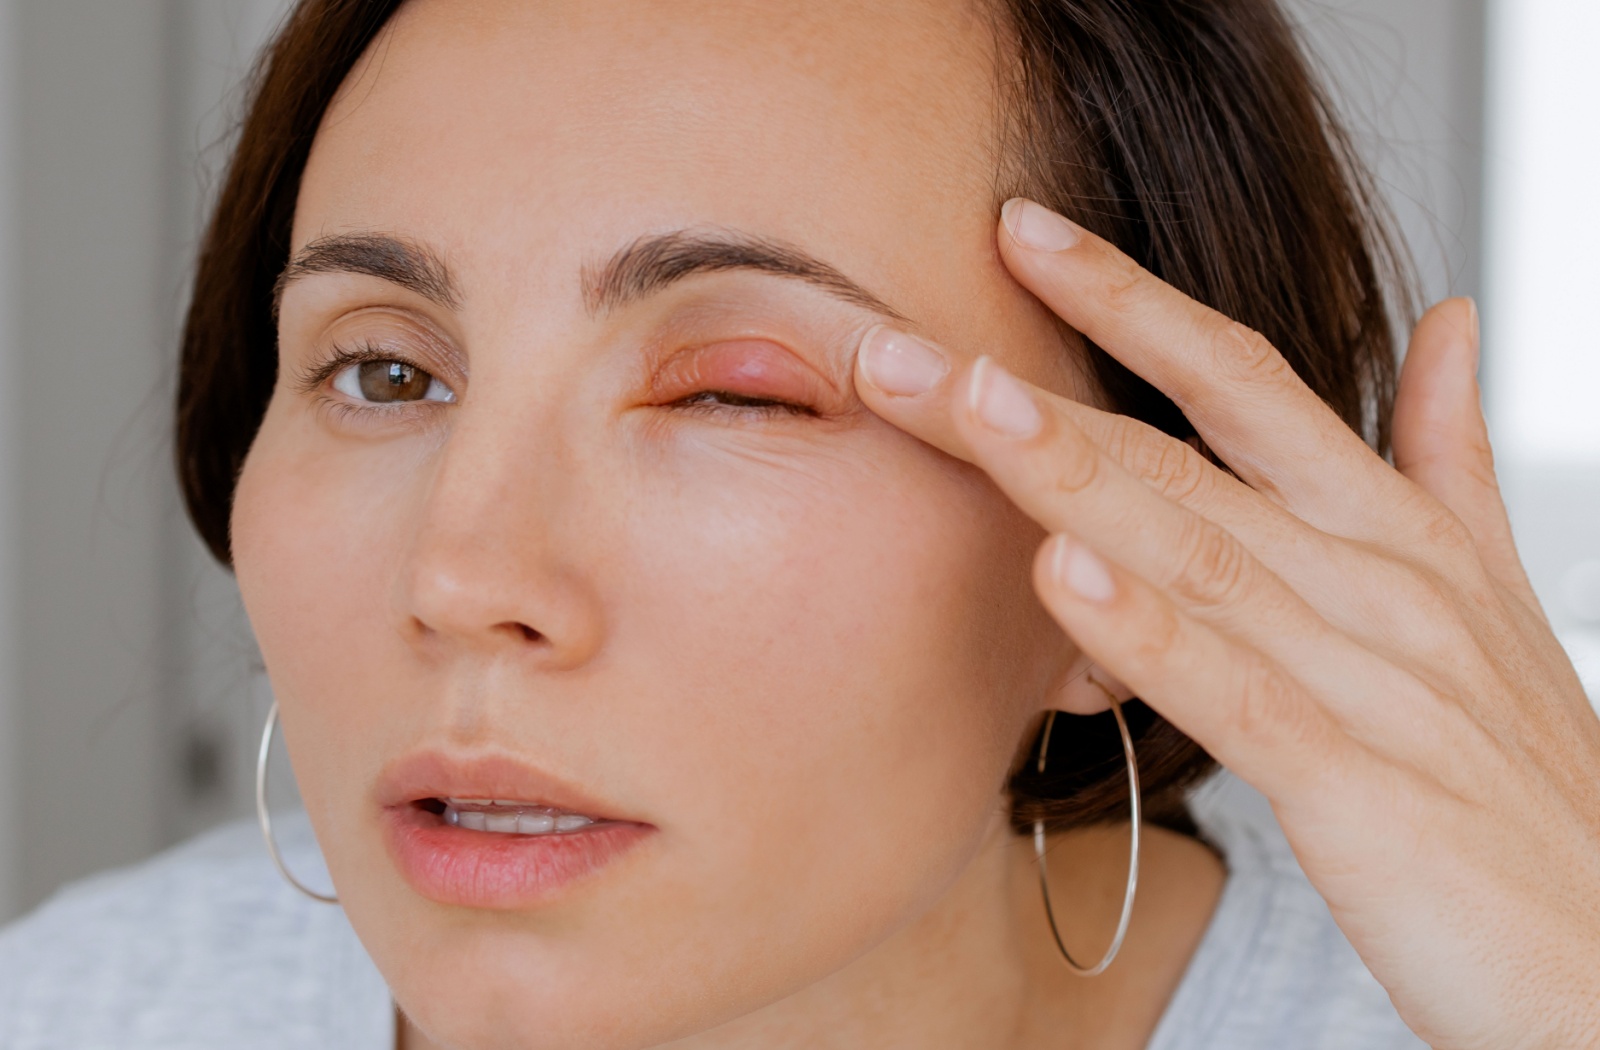 A woman carefully inspects a stye that appears as red bump on her eyelid